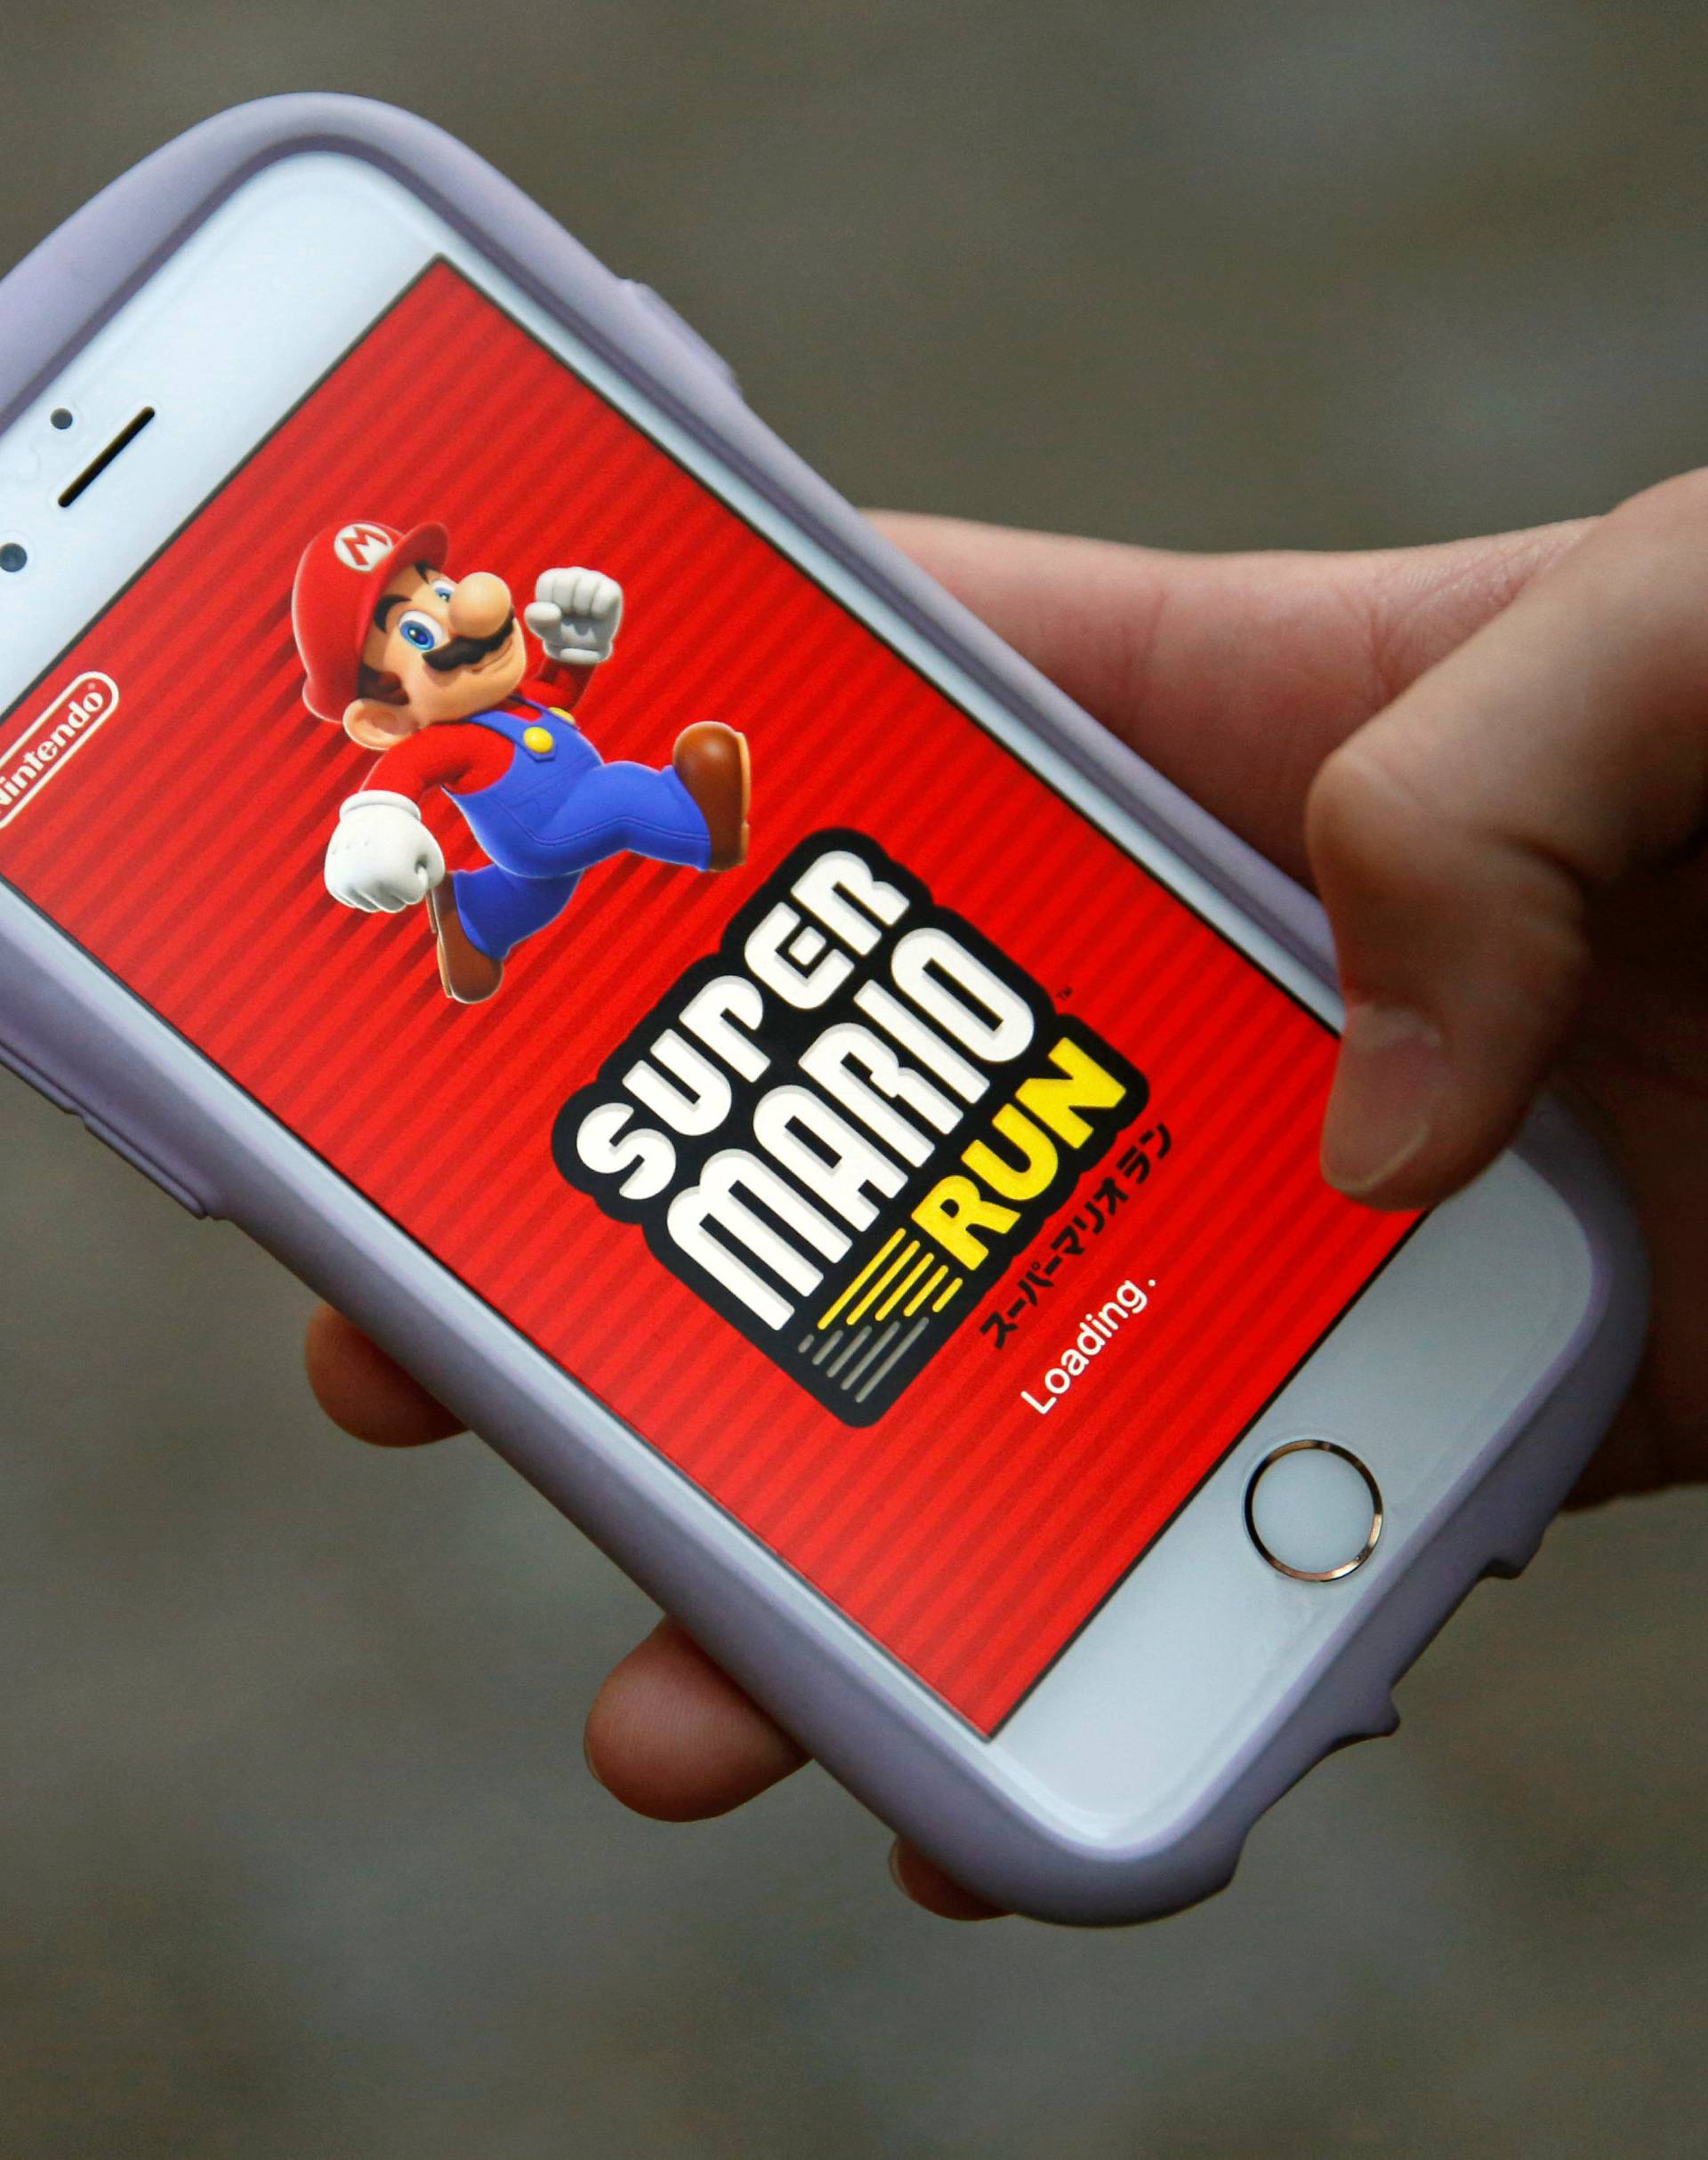 Takuya Nishya shows Nintendo's "Super Mario Run" game on his smartphone by the request of a photographer in Tokyo